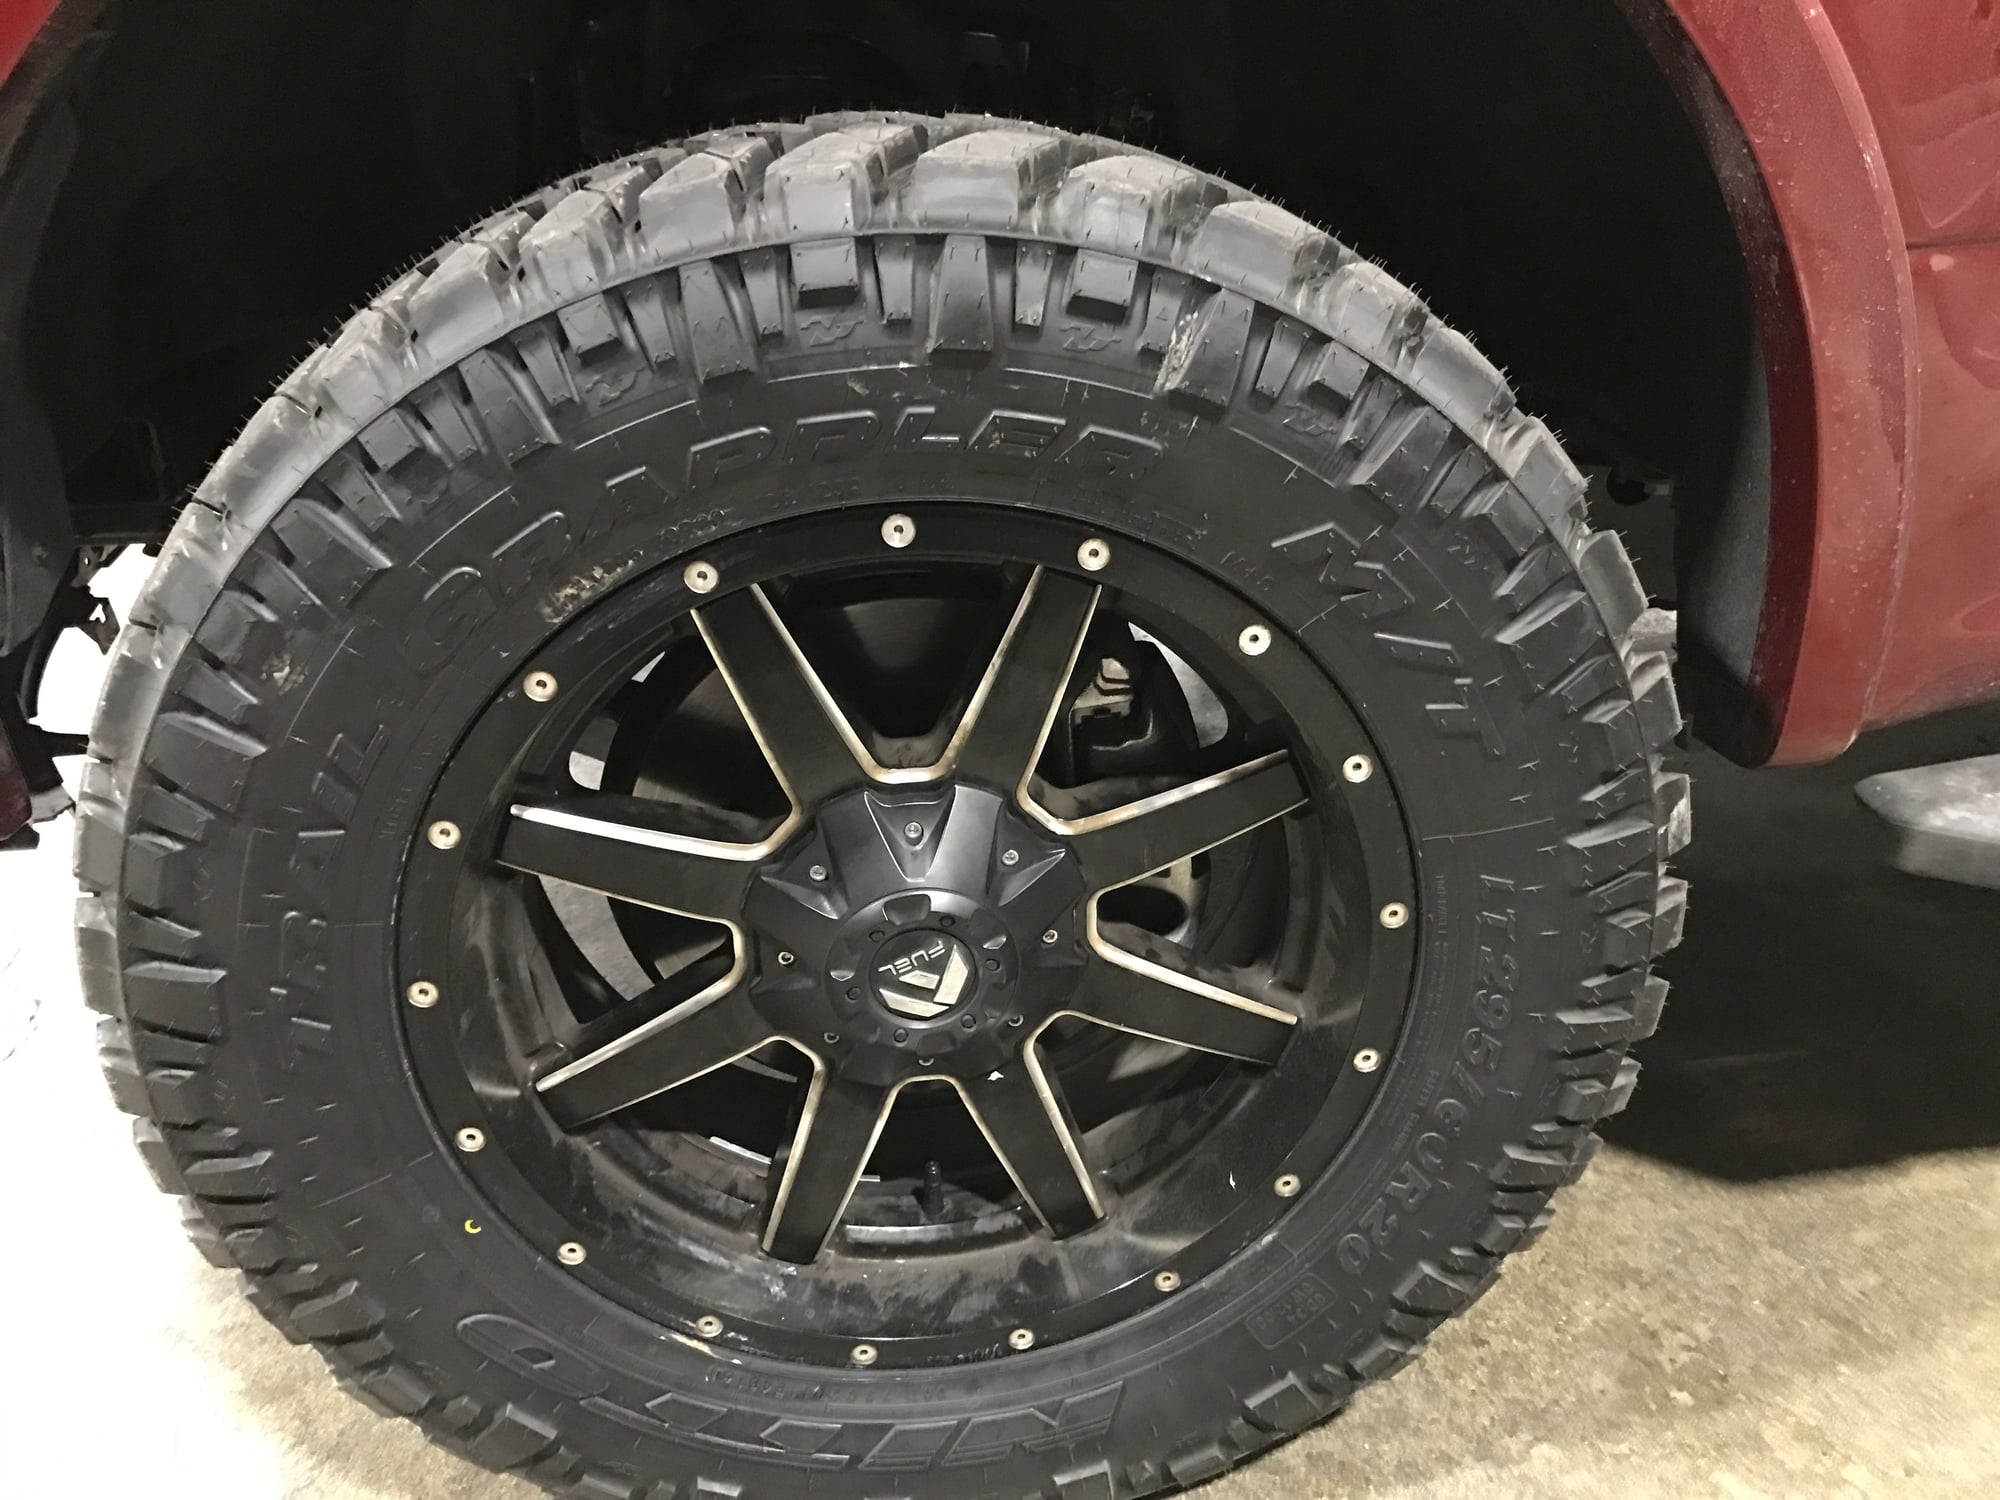 285/65r18 trail grapplers or 295/70r18? 